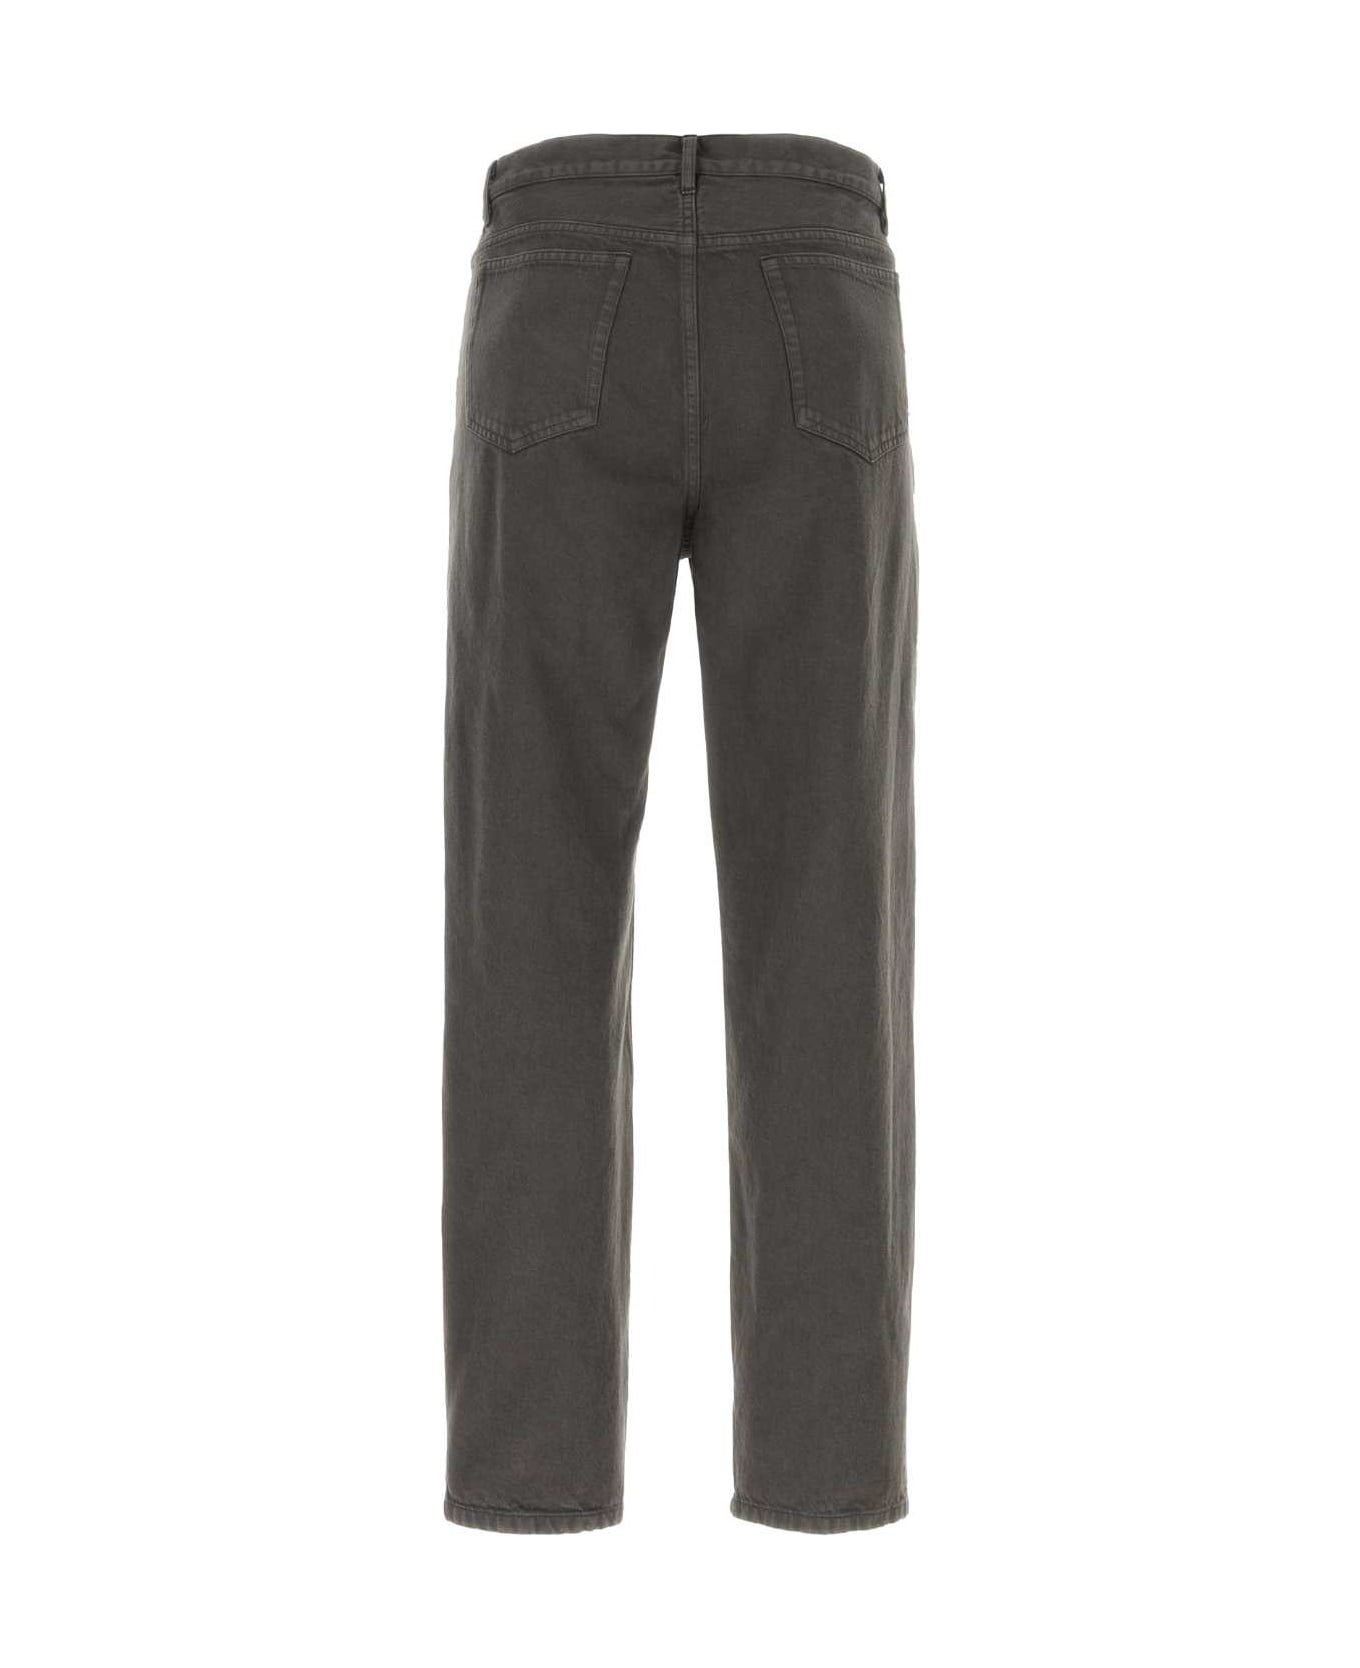 A.P.C. Martin Jeans - ANTHRACITE